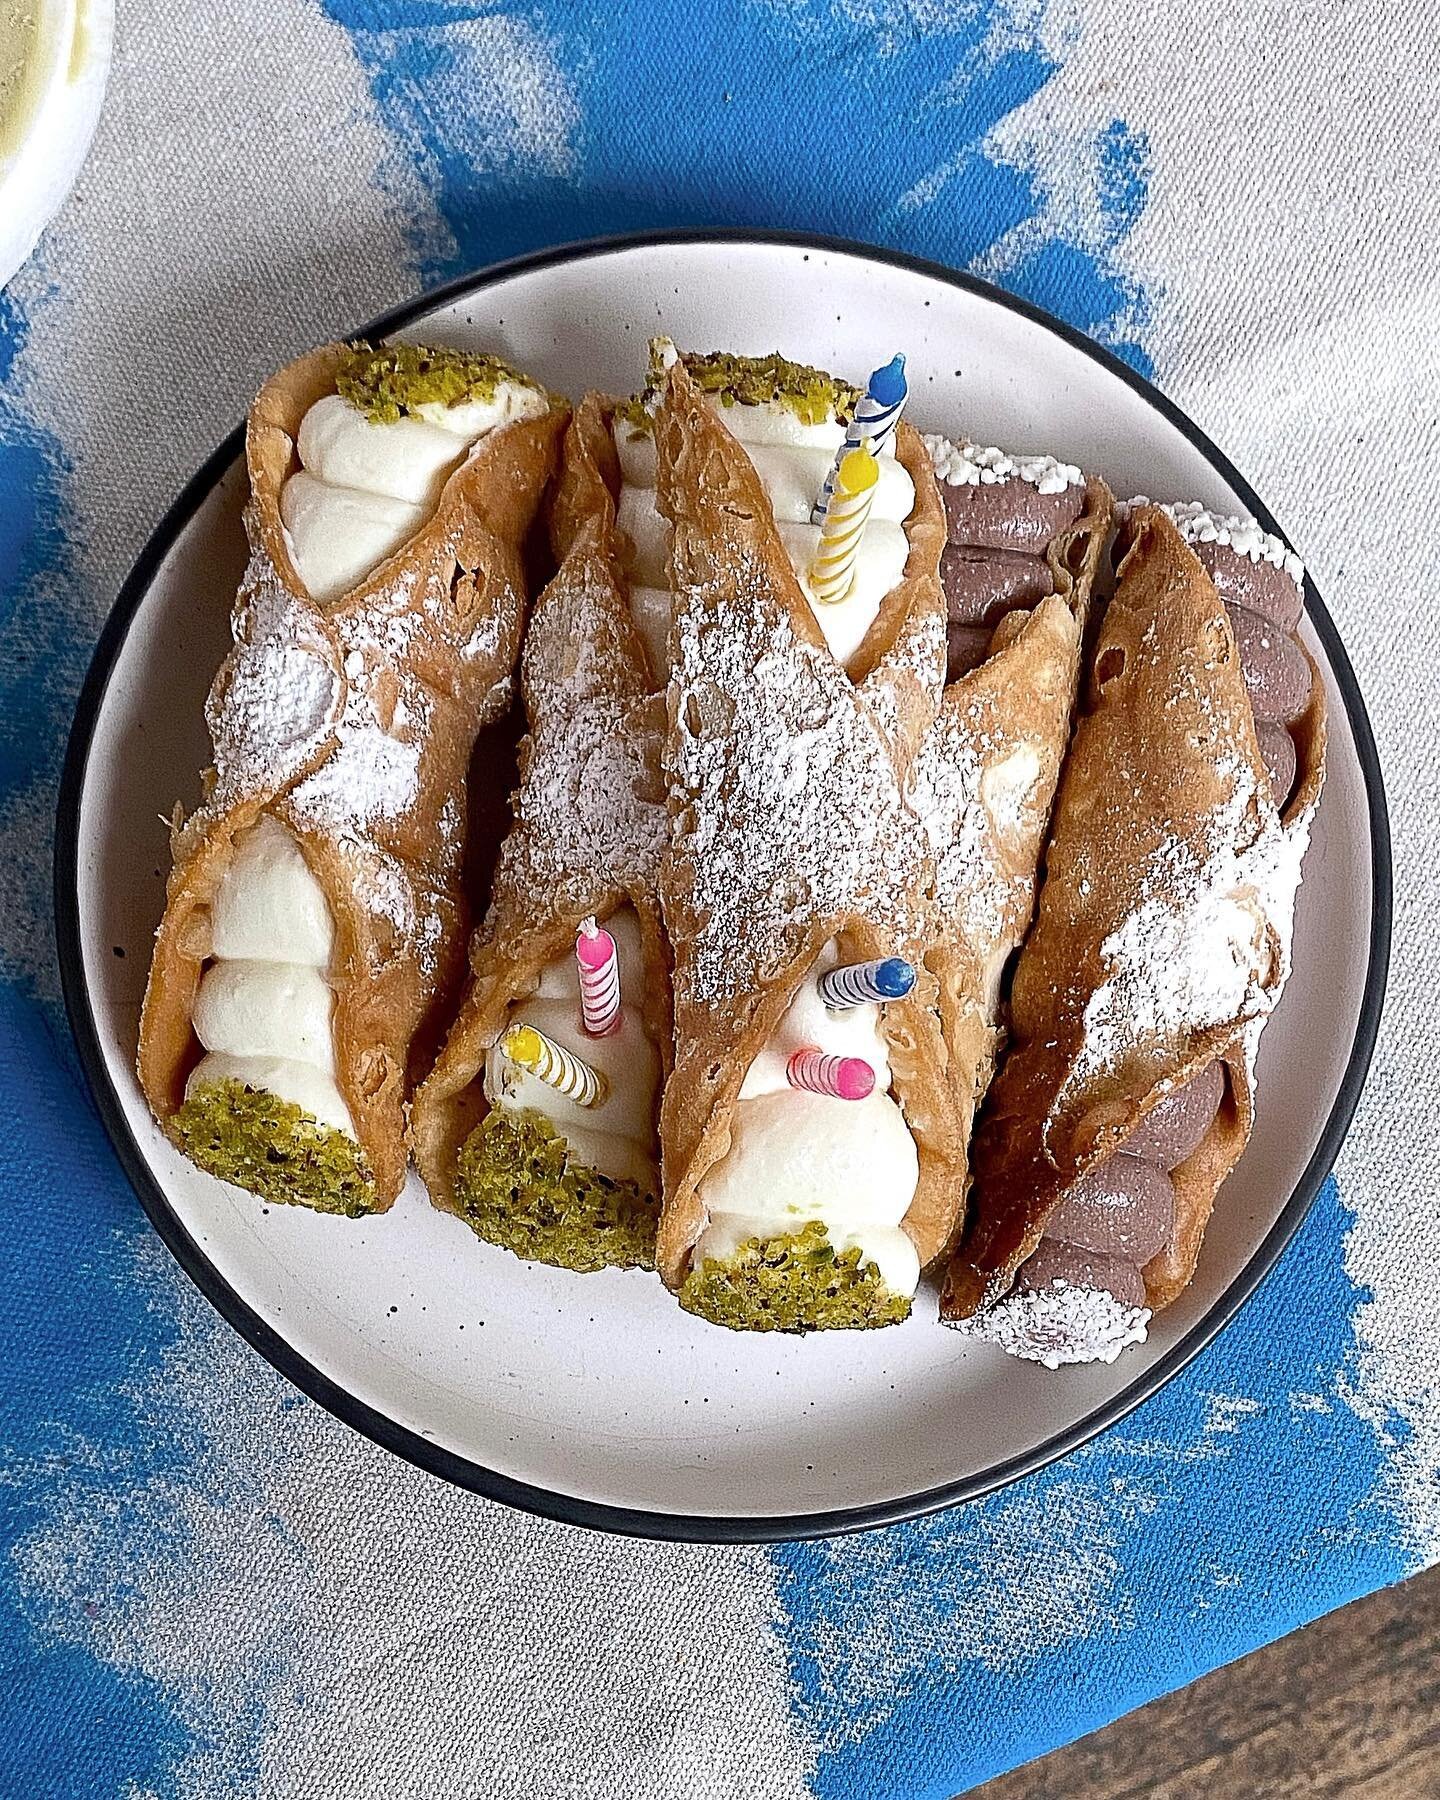 | Birthday cannolis with the good ole cheap candles! Pistachio + Chocolate! ♡